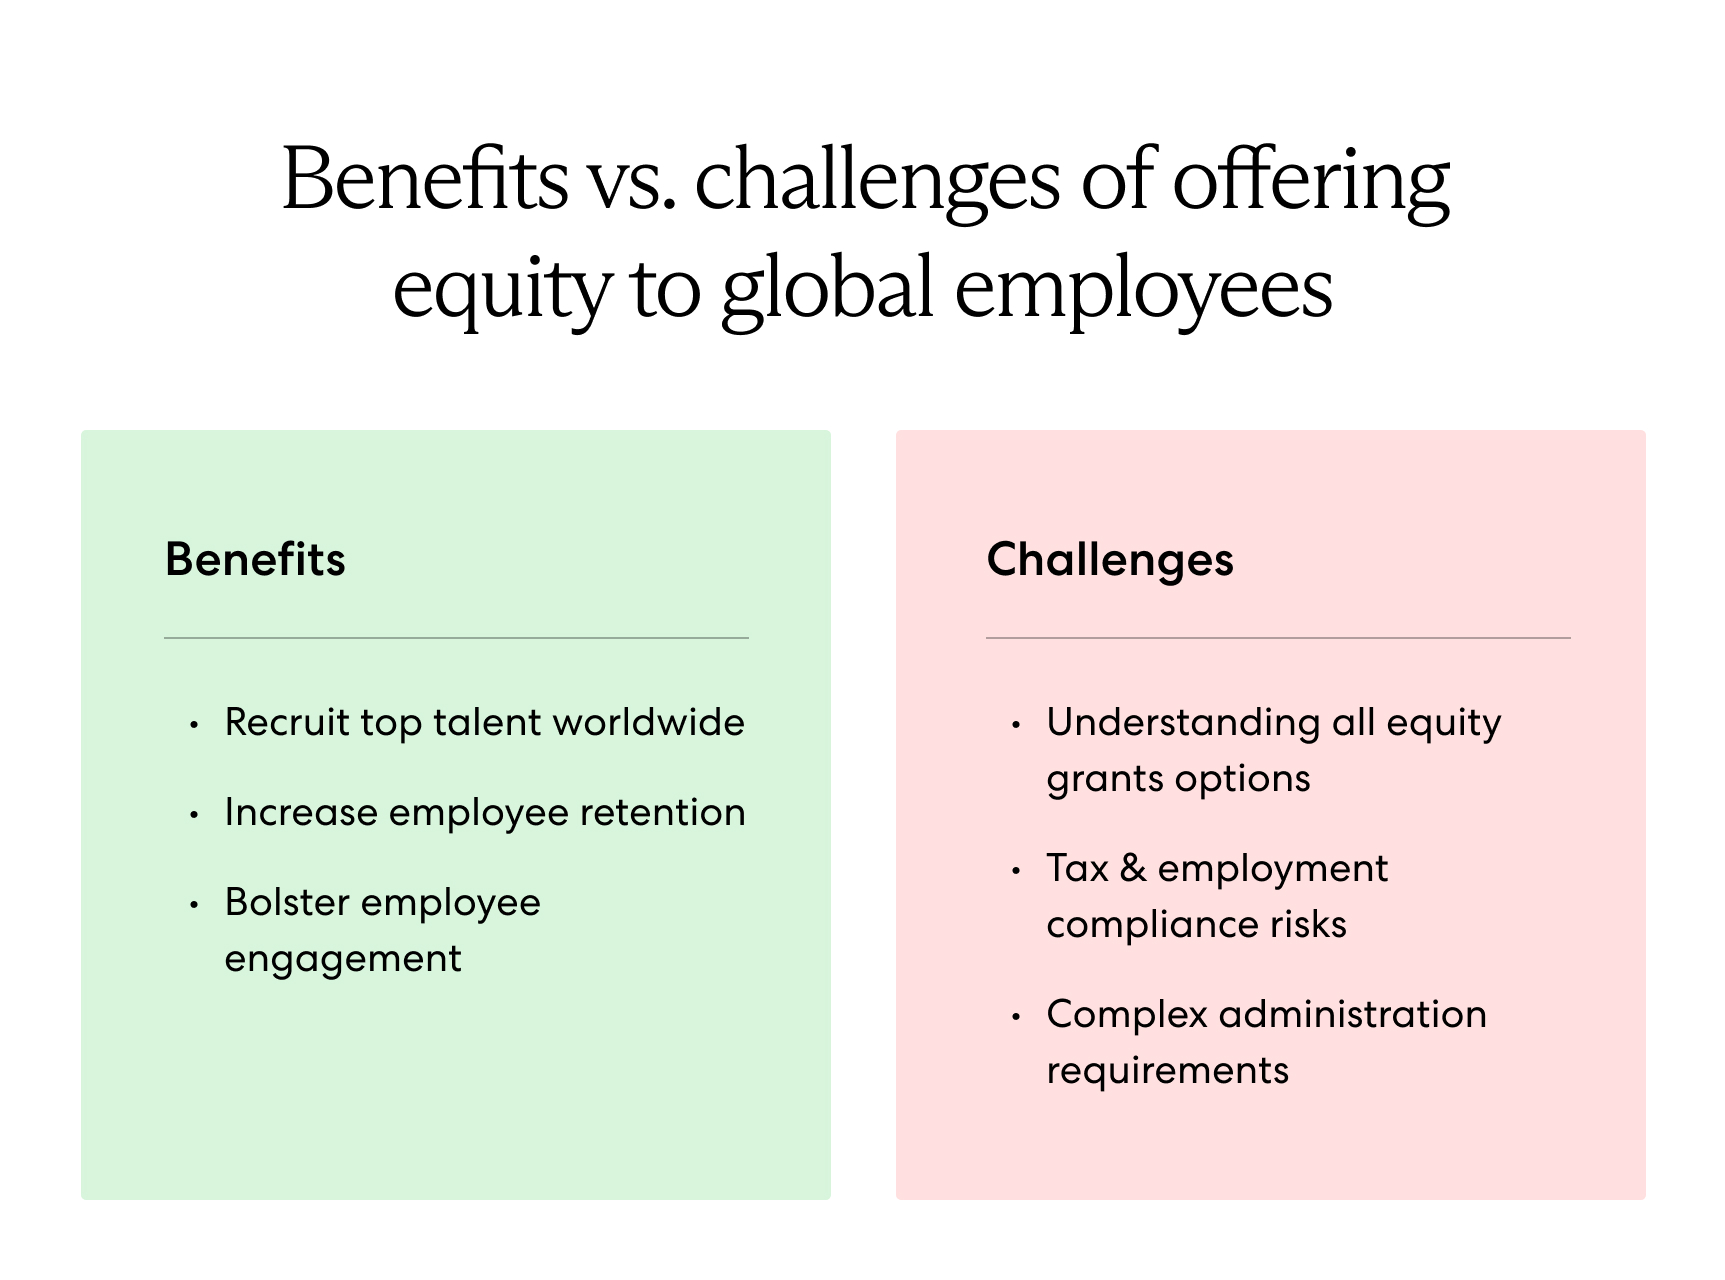 Chart listing key benefits and challenges employers face when granting equity to foreign employees.